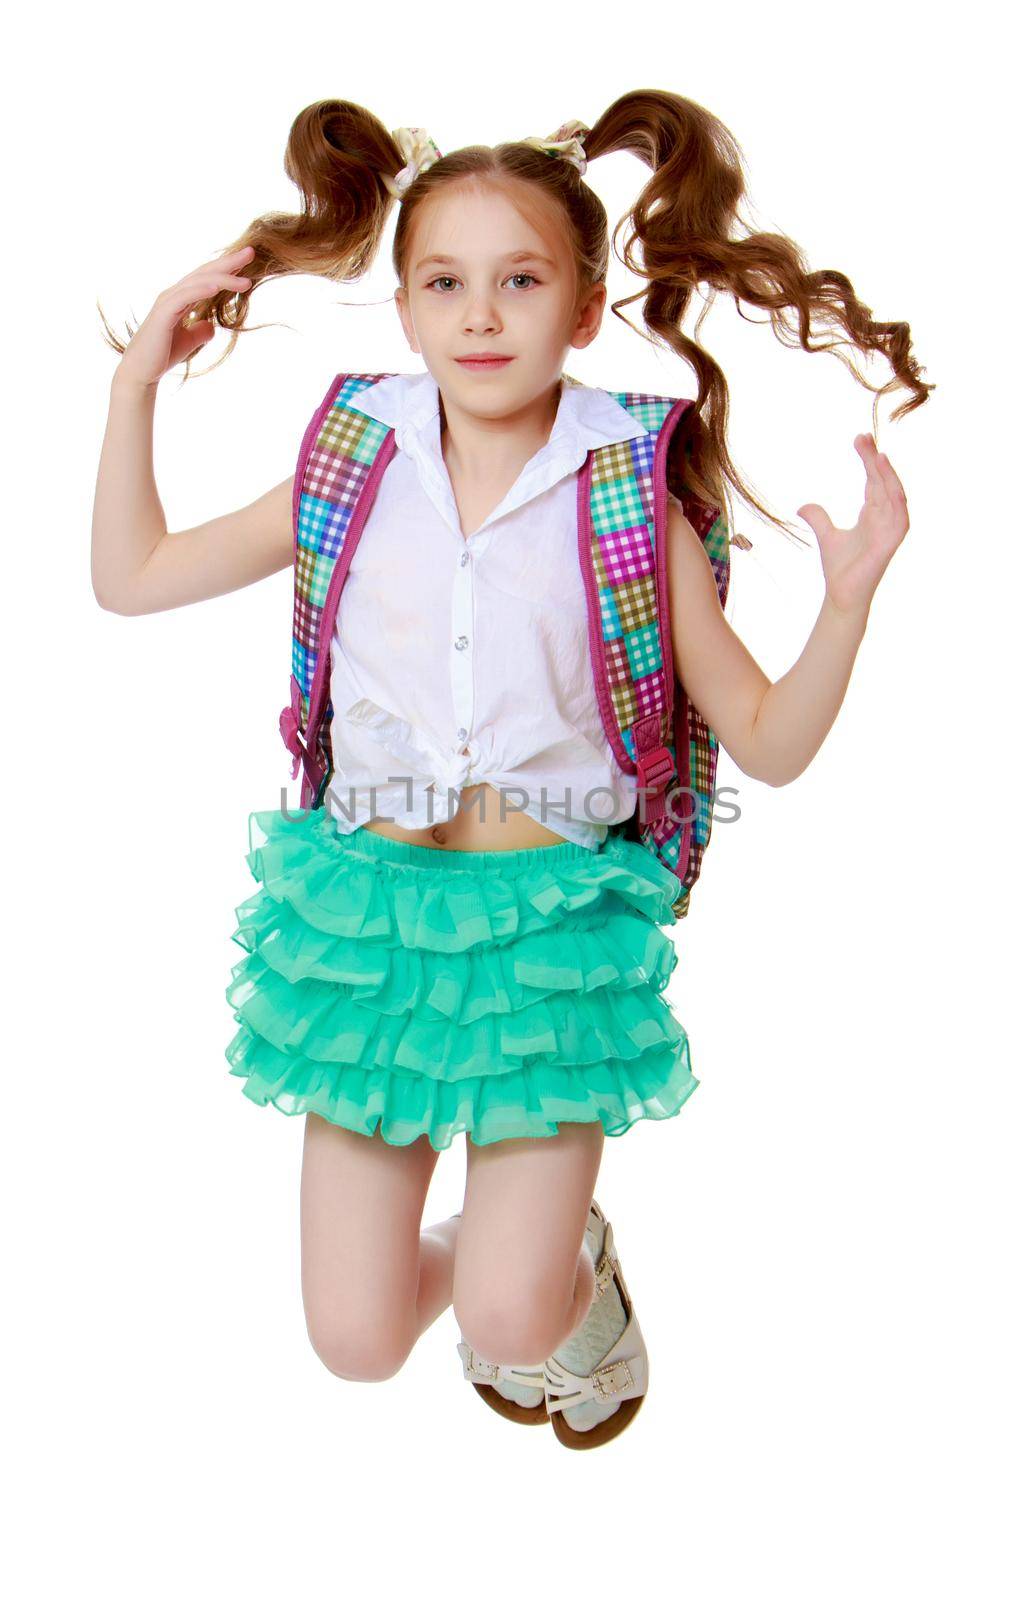 Joyful little girl with long hair to the waist which wire braided white ribbons. In a white shirt without a pattern and green short skirt. Girl jumping with legs tucked under .